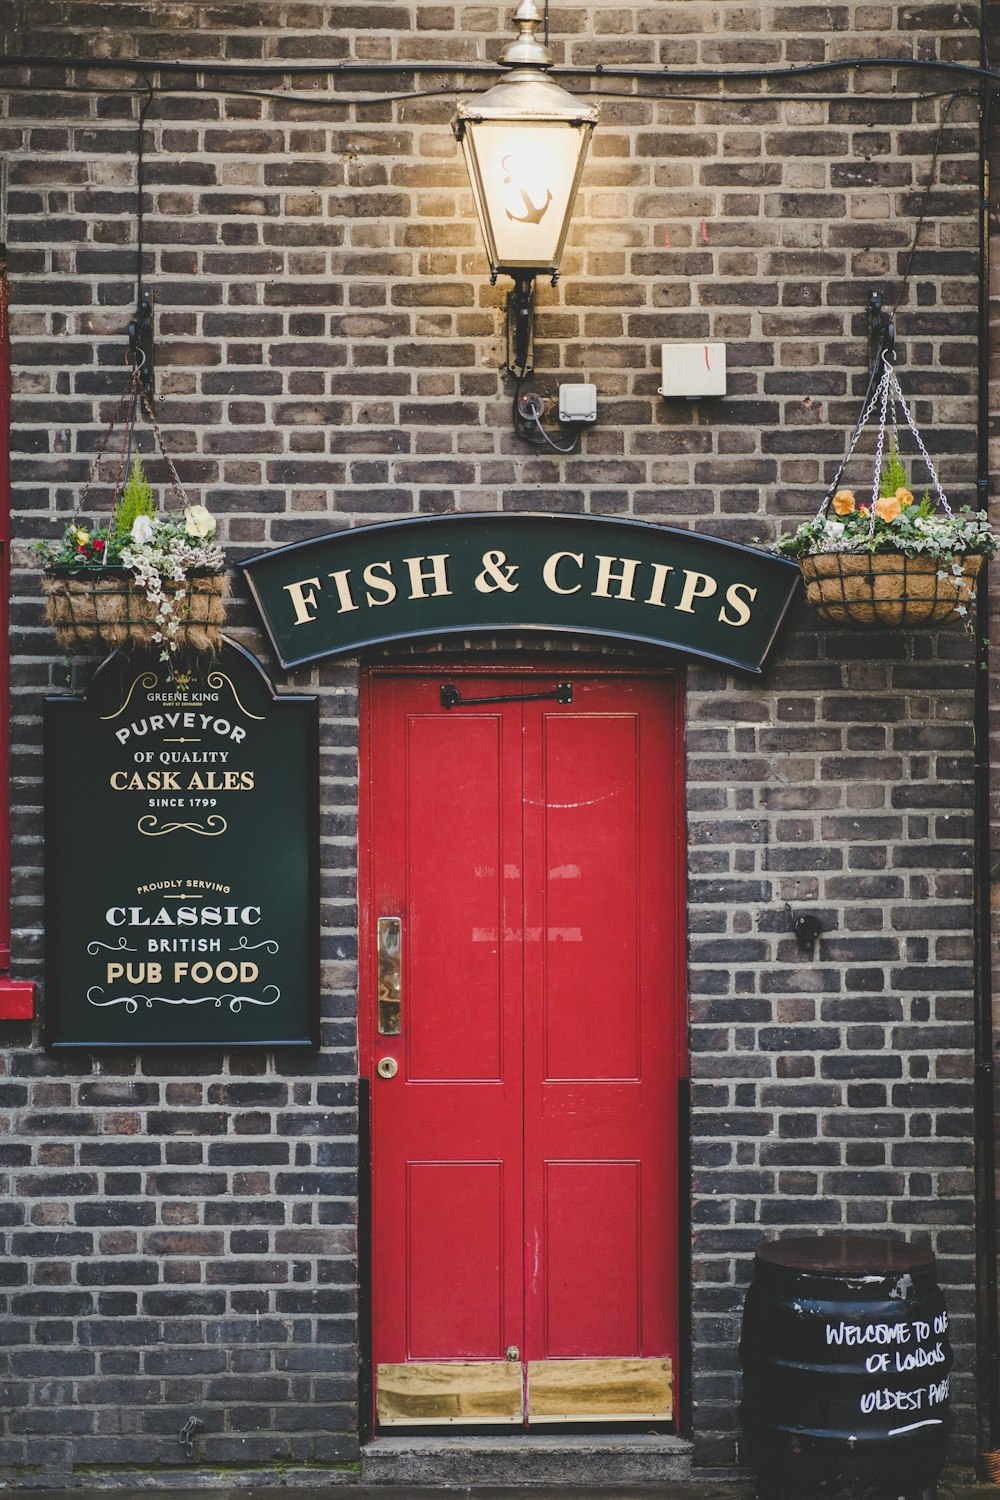 Fish & Chips signage over red door